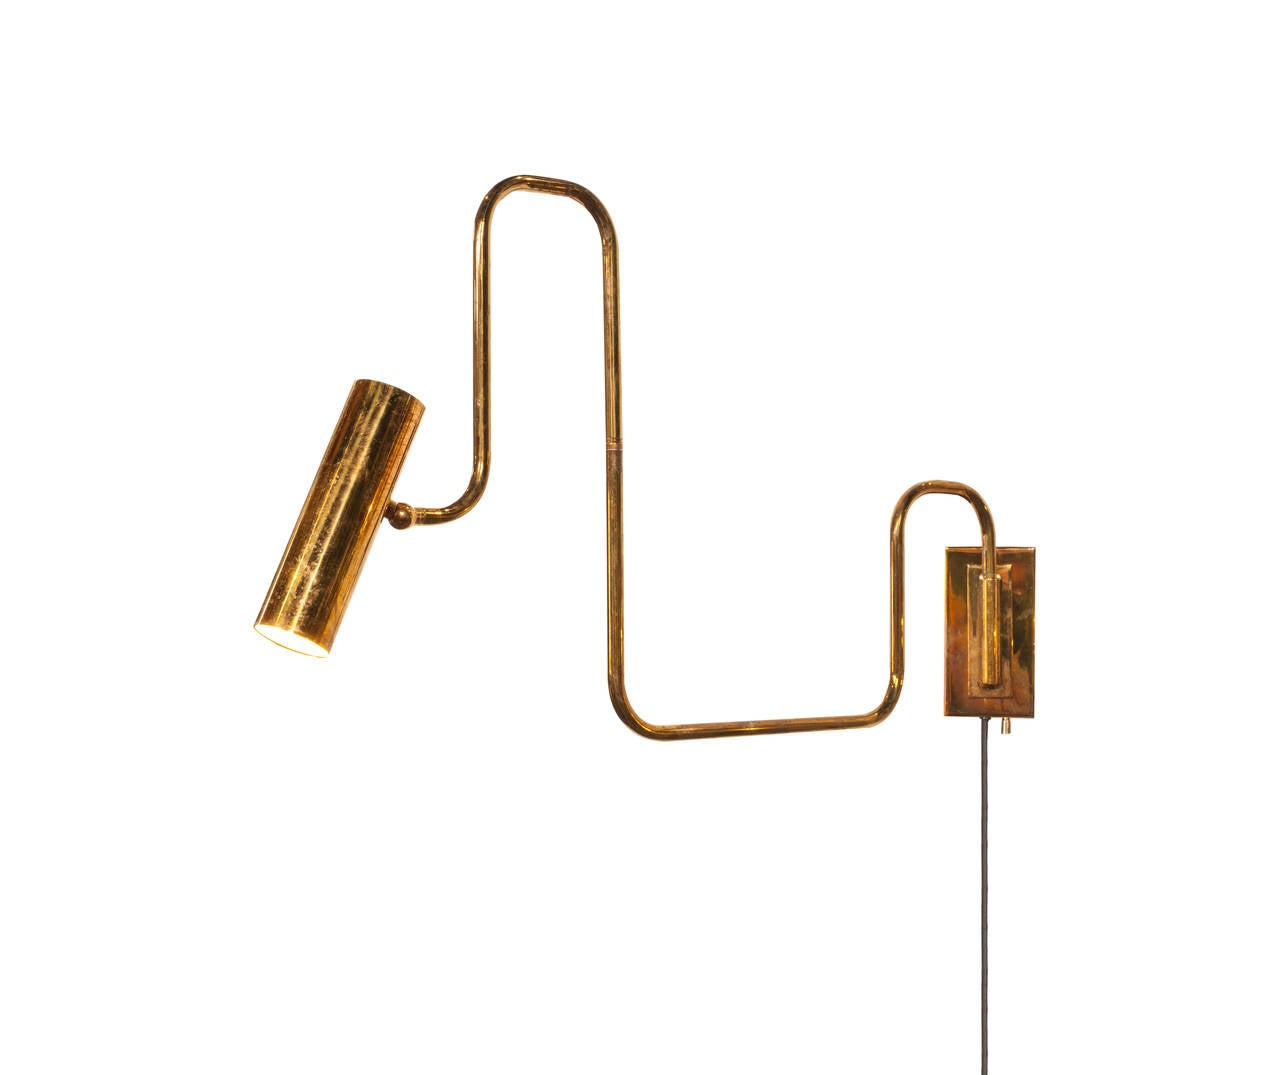 Brass handmade pivot light designed by Christopher Gentner. A perfect swiveling wall light for next to the bed, desk or any situation. The finish is called tarnished brass. 
The arm swivels in many directions as well as the tubular head of the